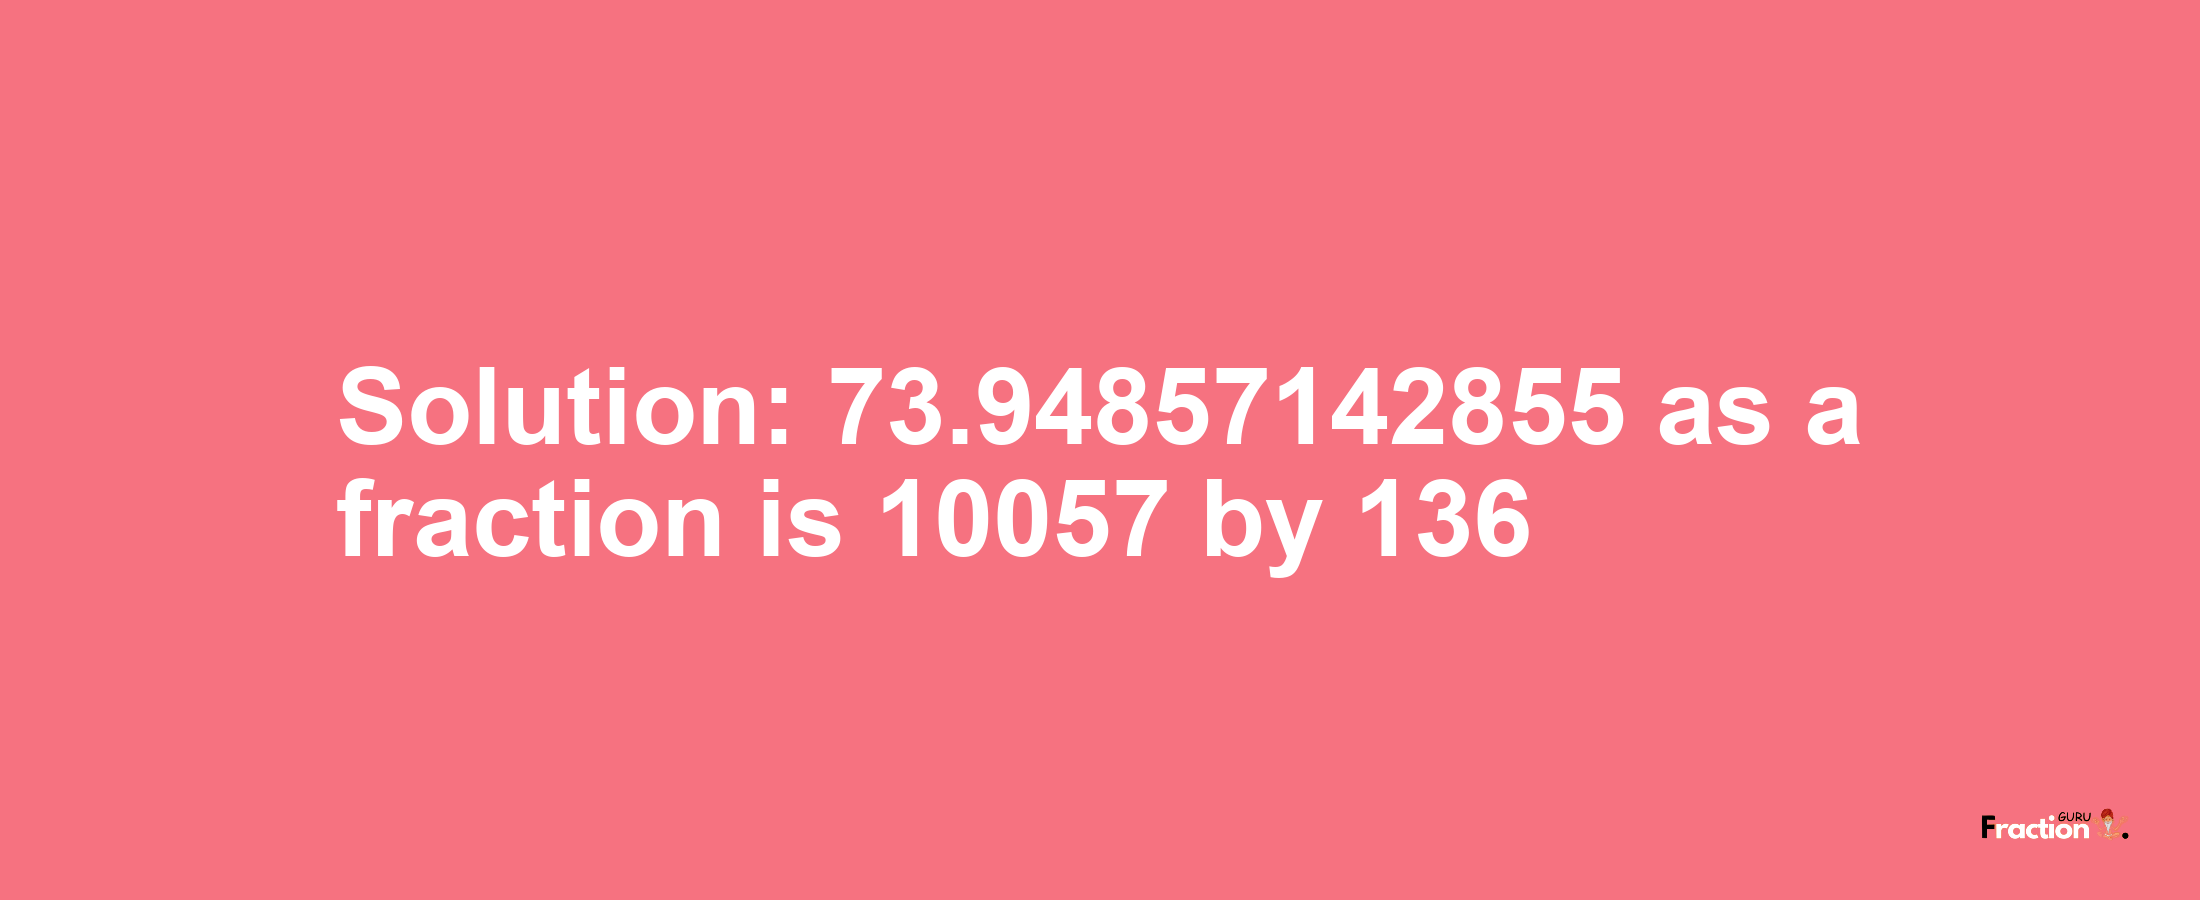 Solution:73.94857142855 as a fraction is 10057/136